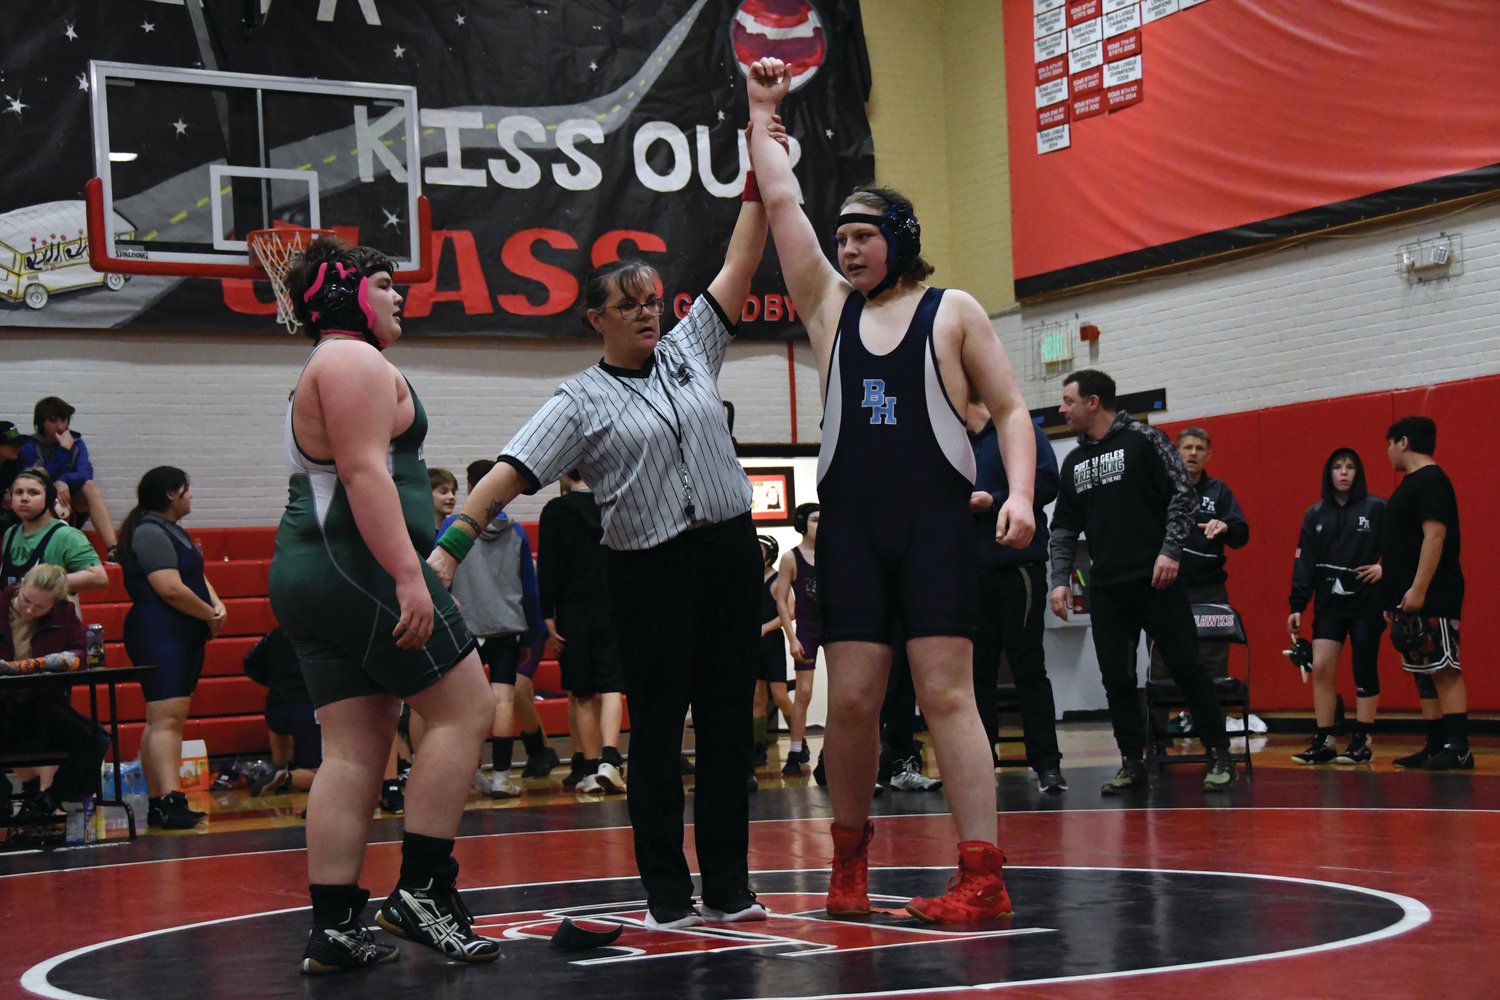 Oliver Ingersall, a Chimacum eighth-grader, is declared the victor after pinning his Port Angeles peer.